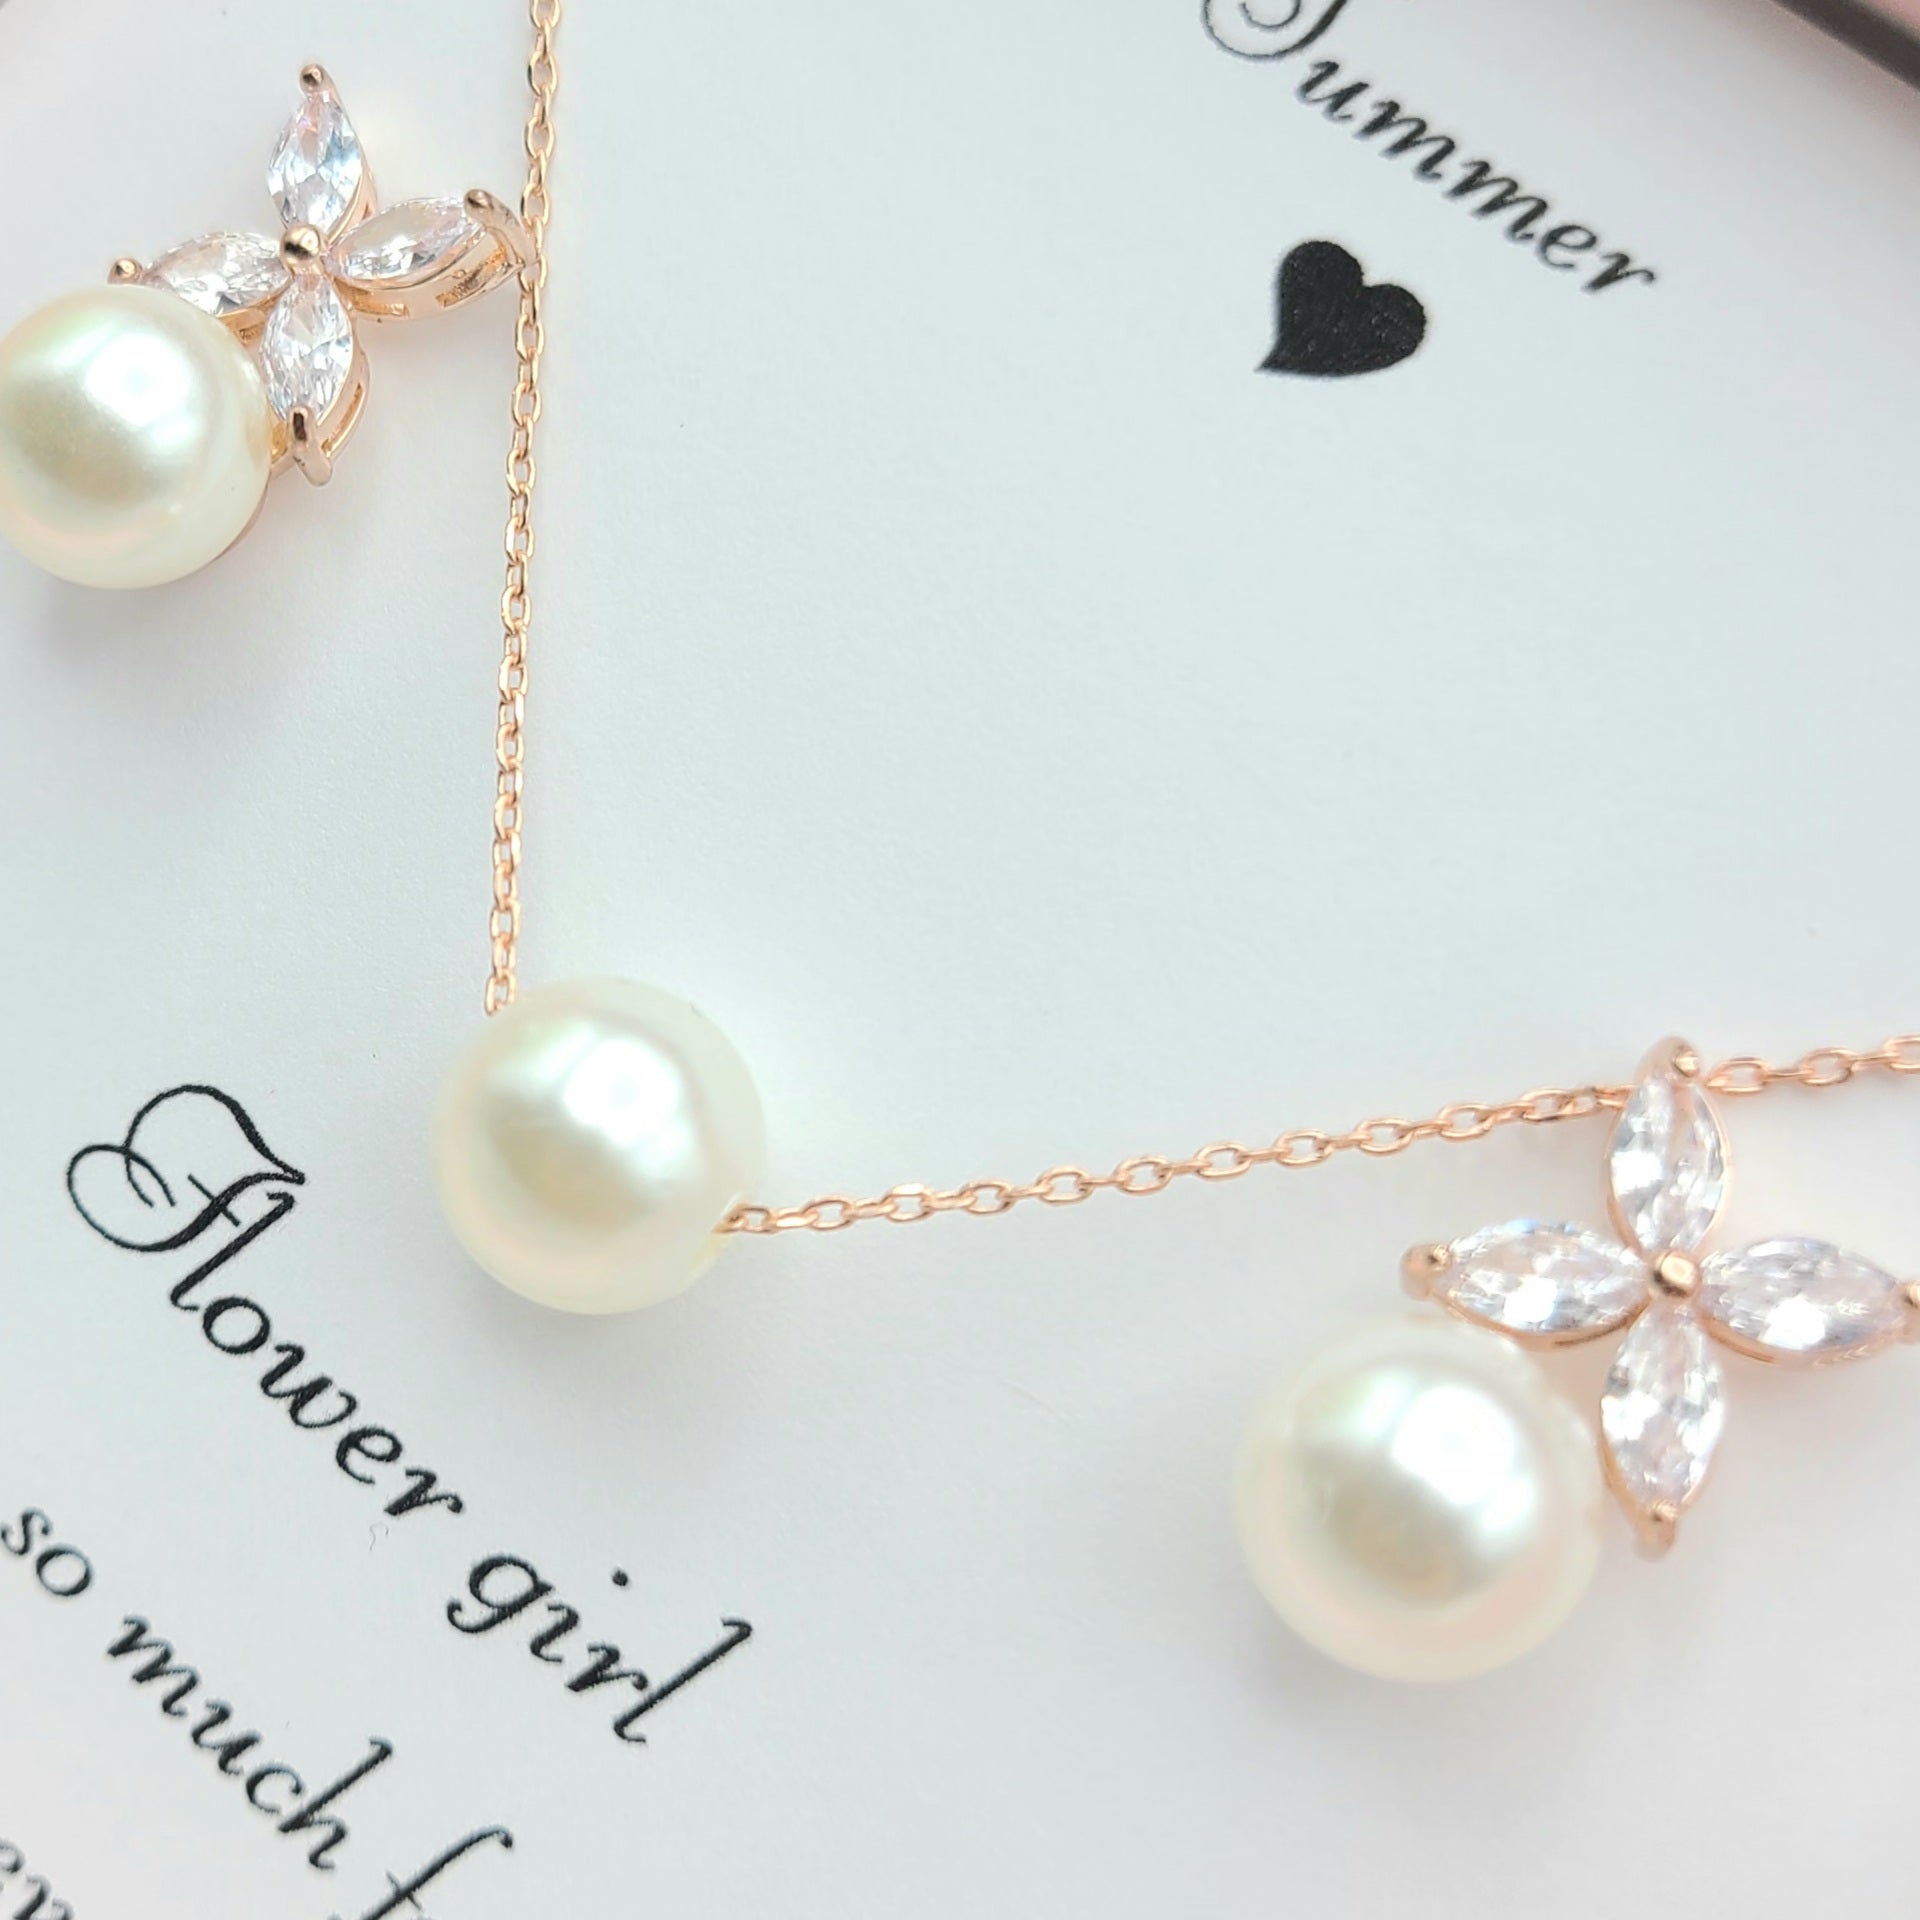 5-Pearl accessories you need in your jewelry collection –  TreasureFineJeweler